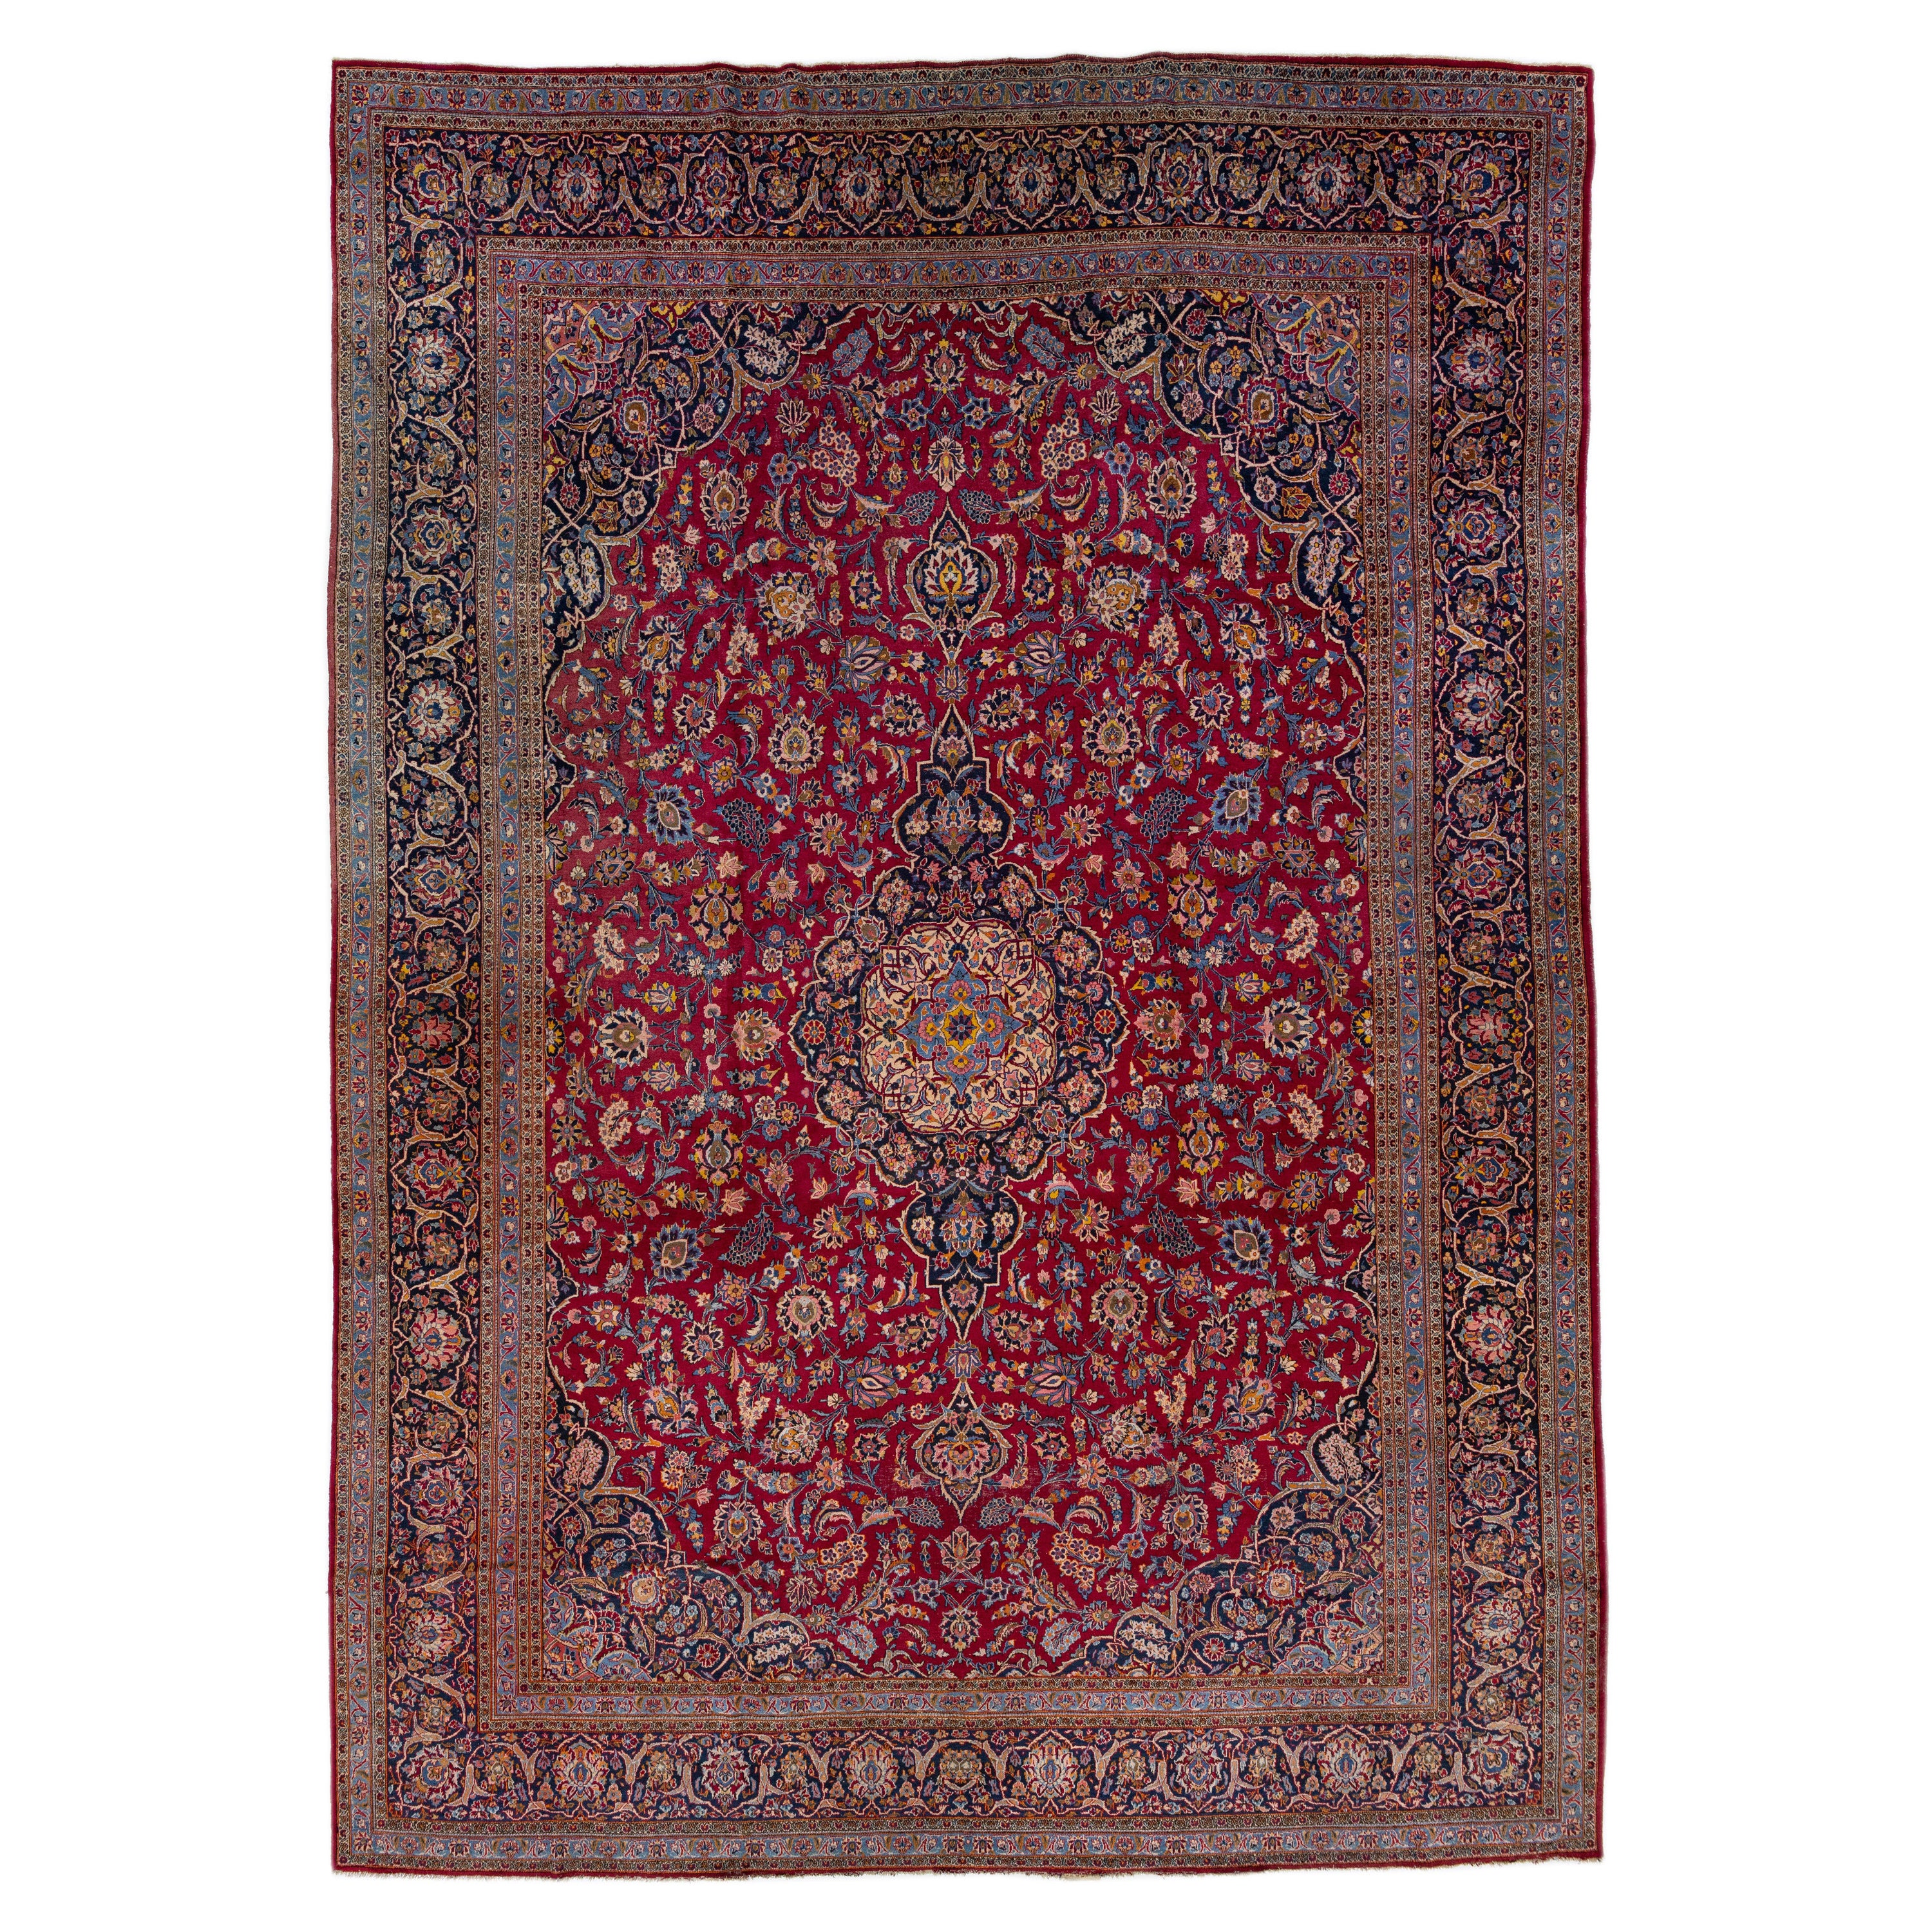 Oversize Antique Persian Kashan Red Wool Rug with Medallion Motif